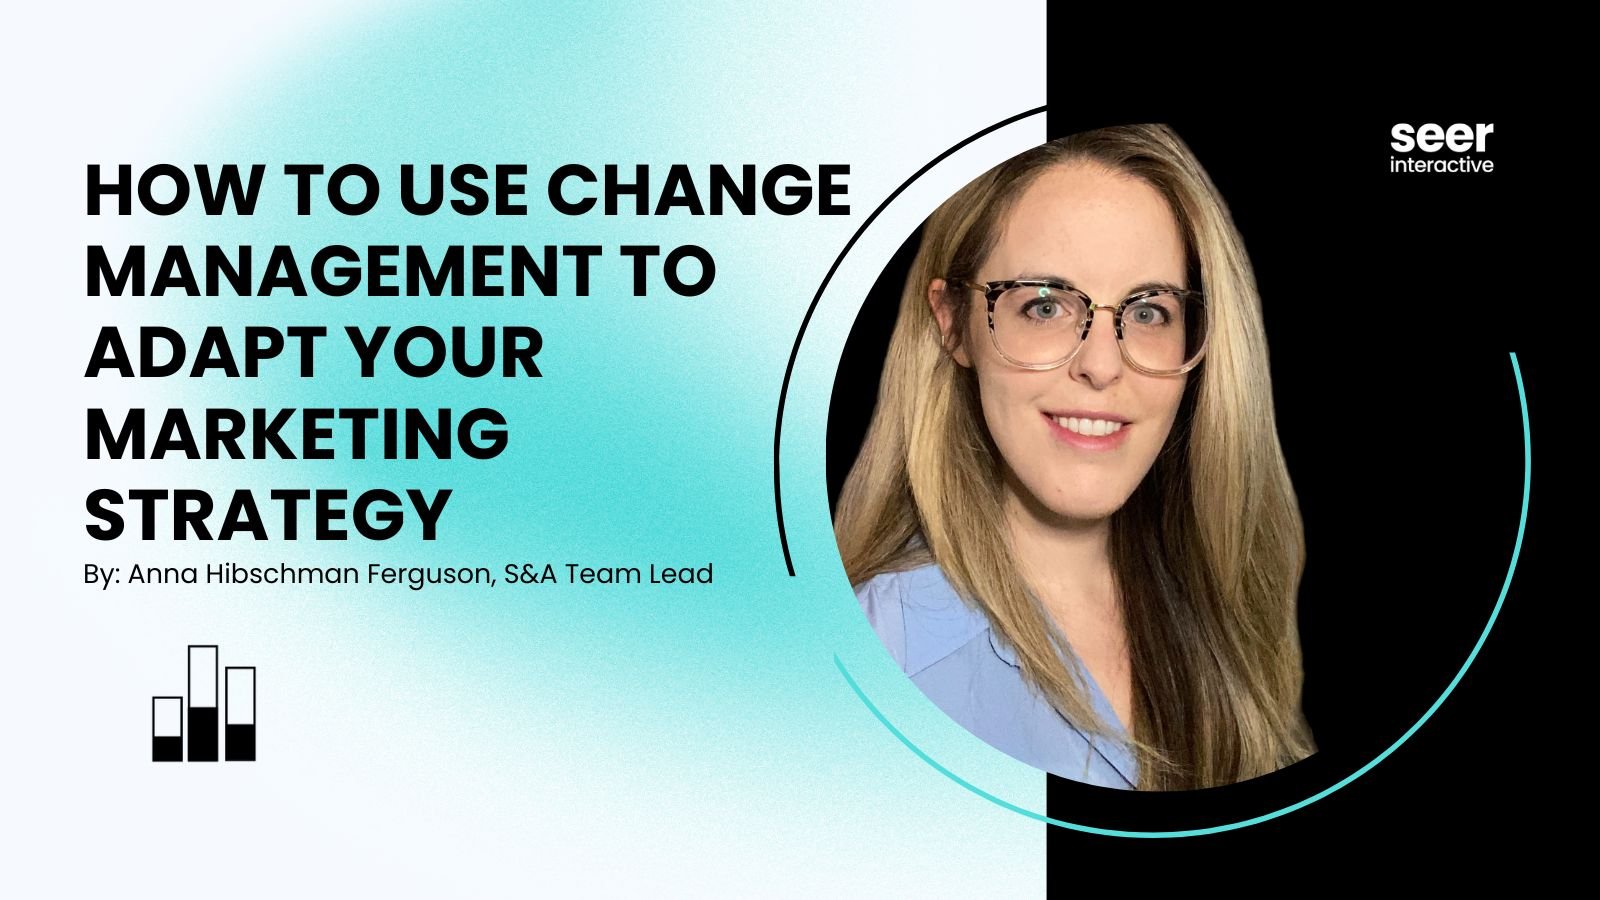 How to use Change Management to Adapt Your Marketing Strategy